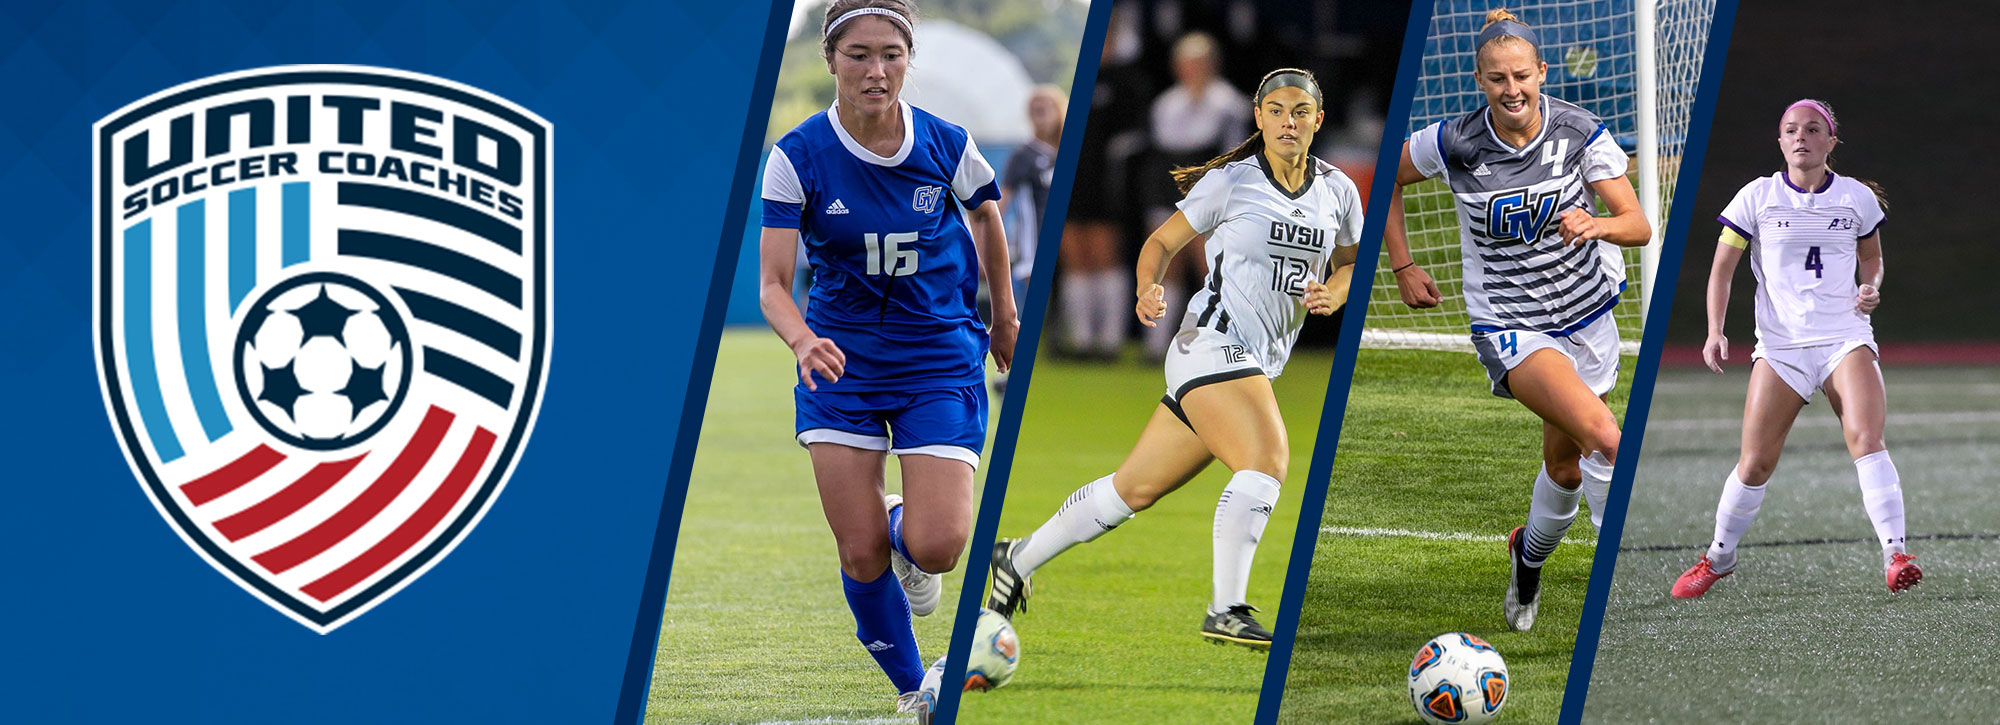 Four #GLIACWSOC Standouts Named United Soccer Coaches All-Americans